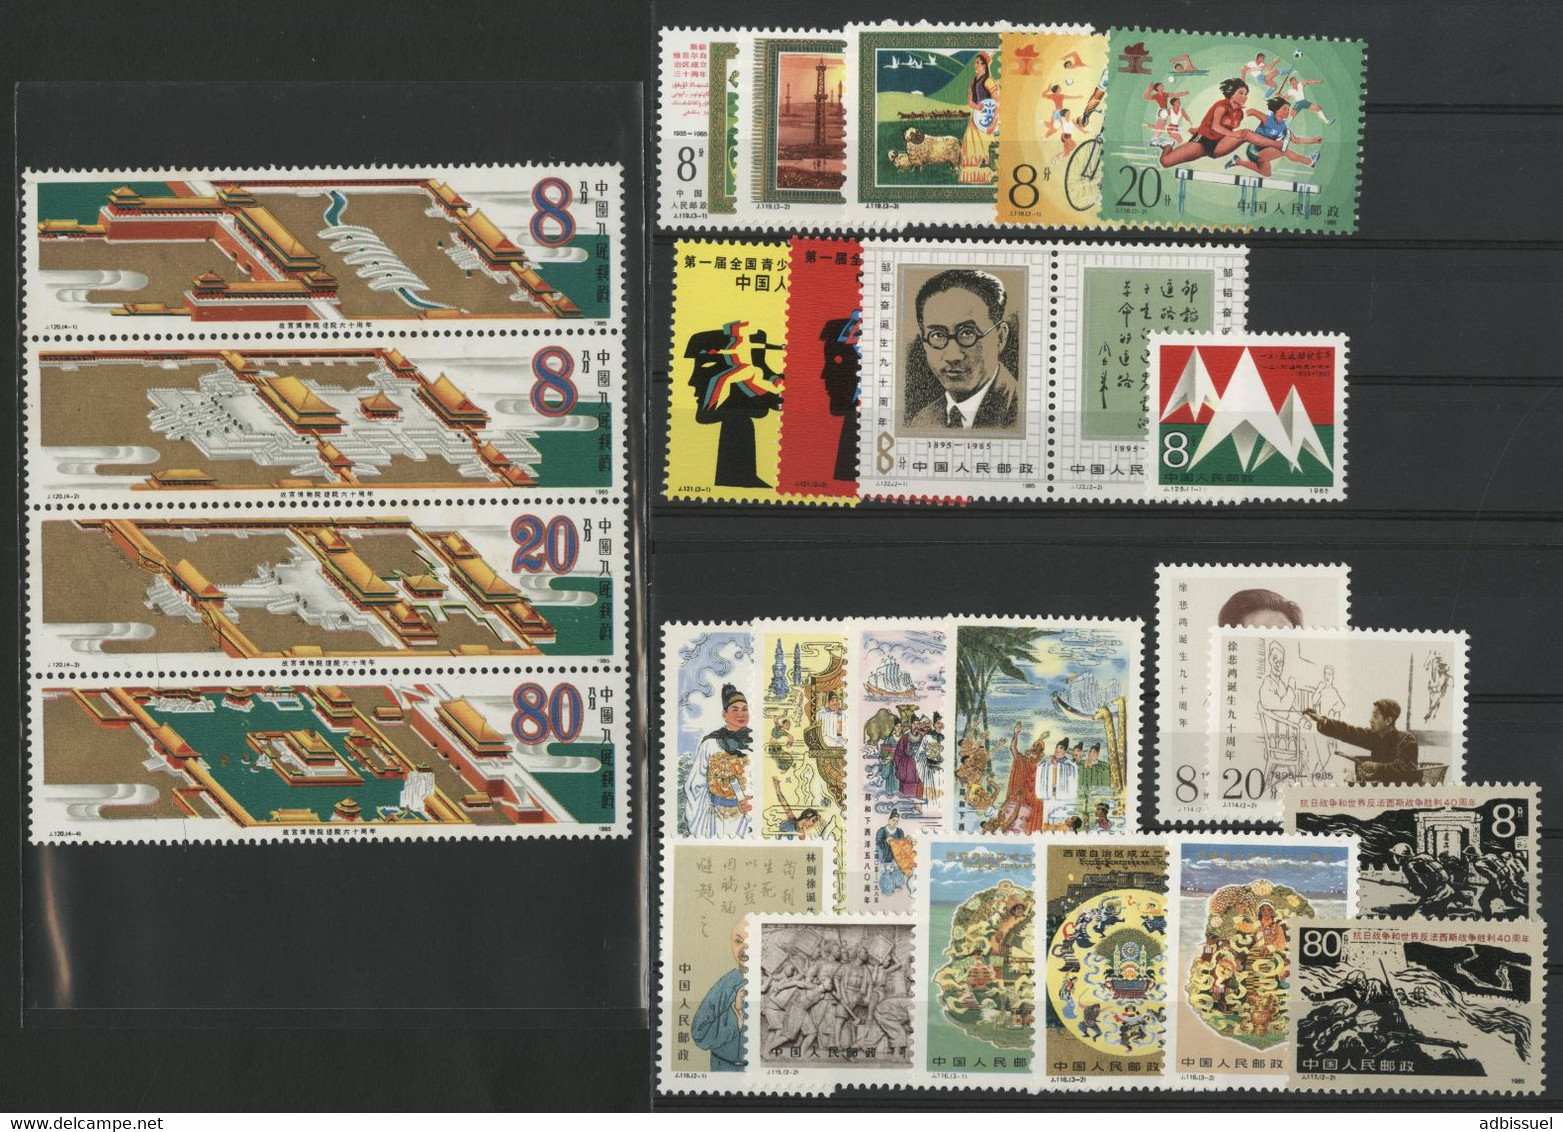 CHINA / CHINE 1985 Value 21 €. 28 Commemoratives Stamps MNH ** N° 2732 To 2758. VG/TB. - Ungebraucht